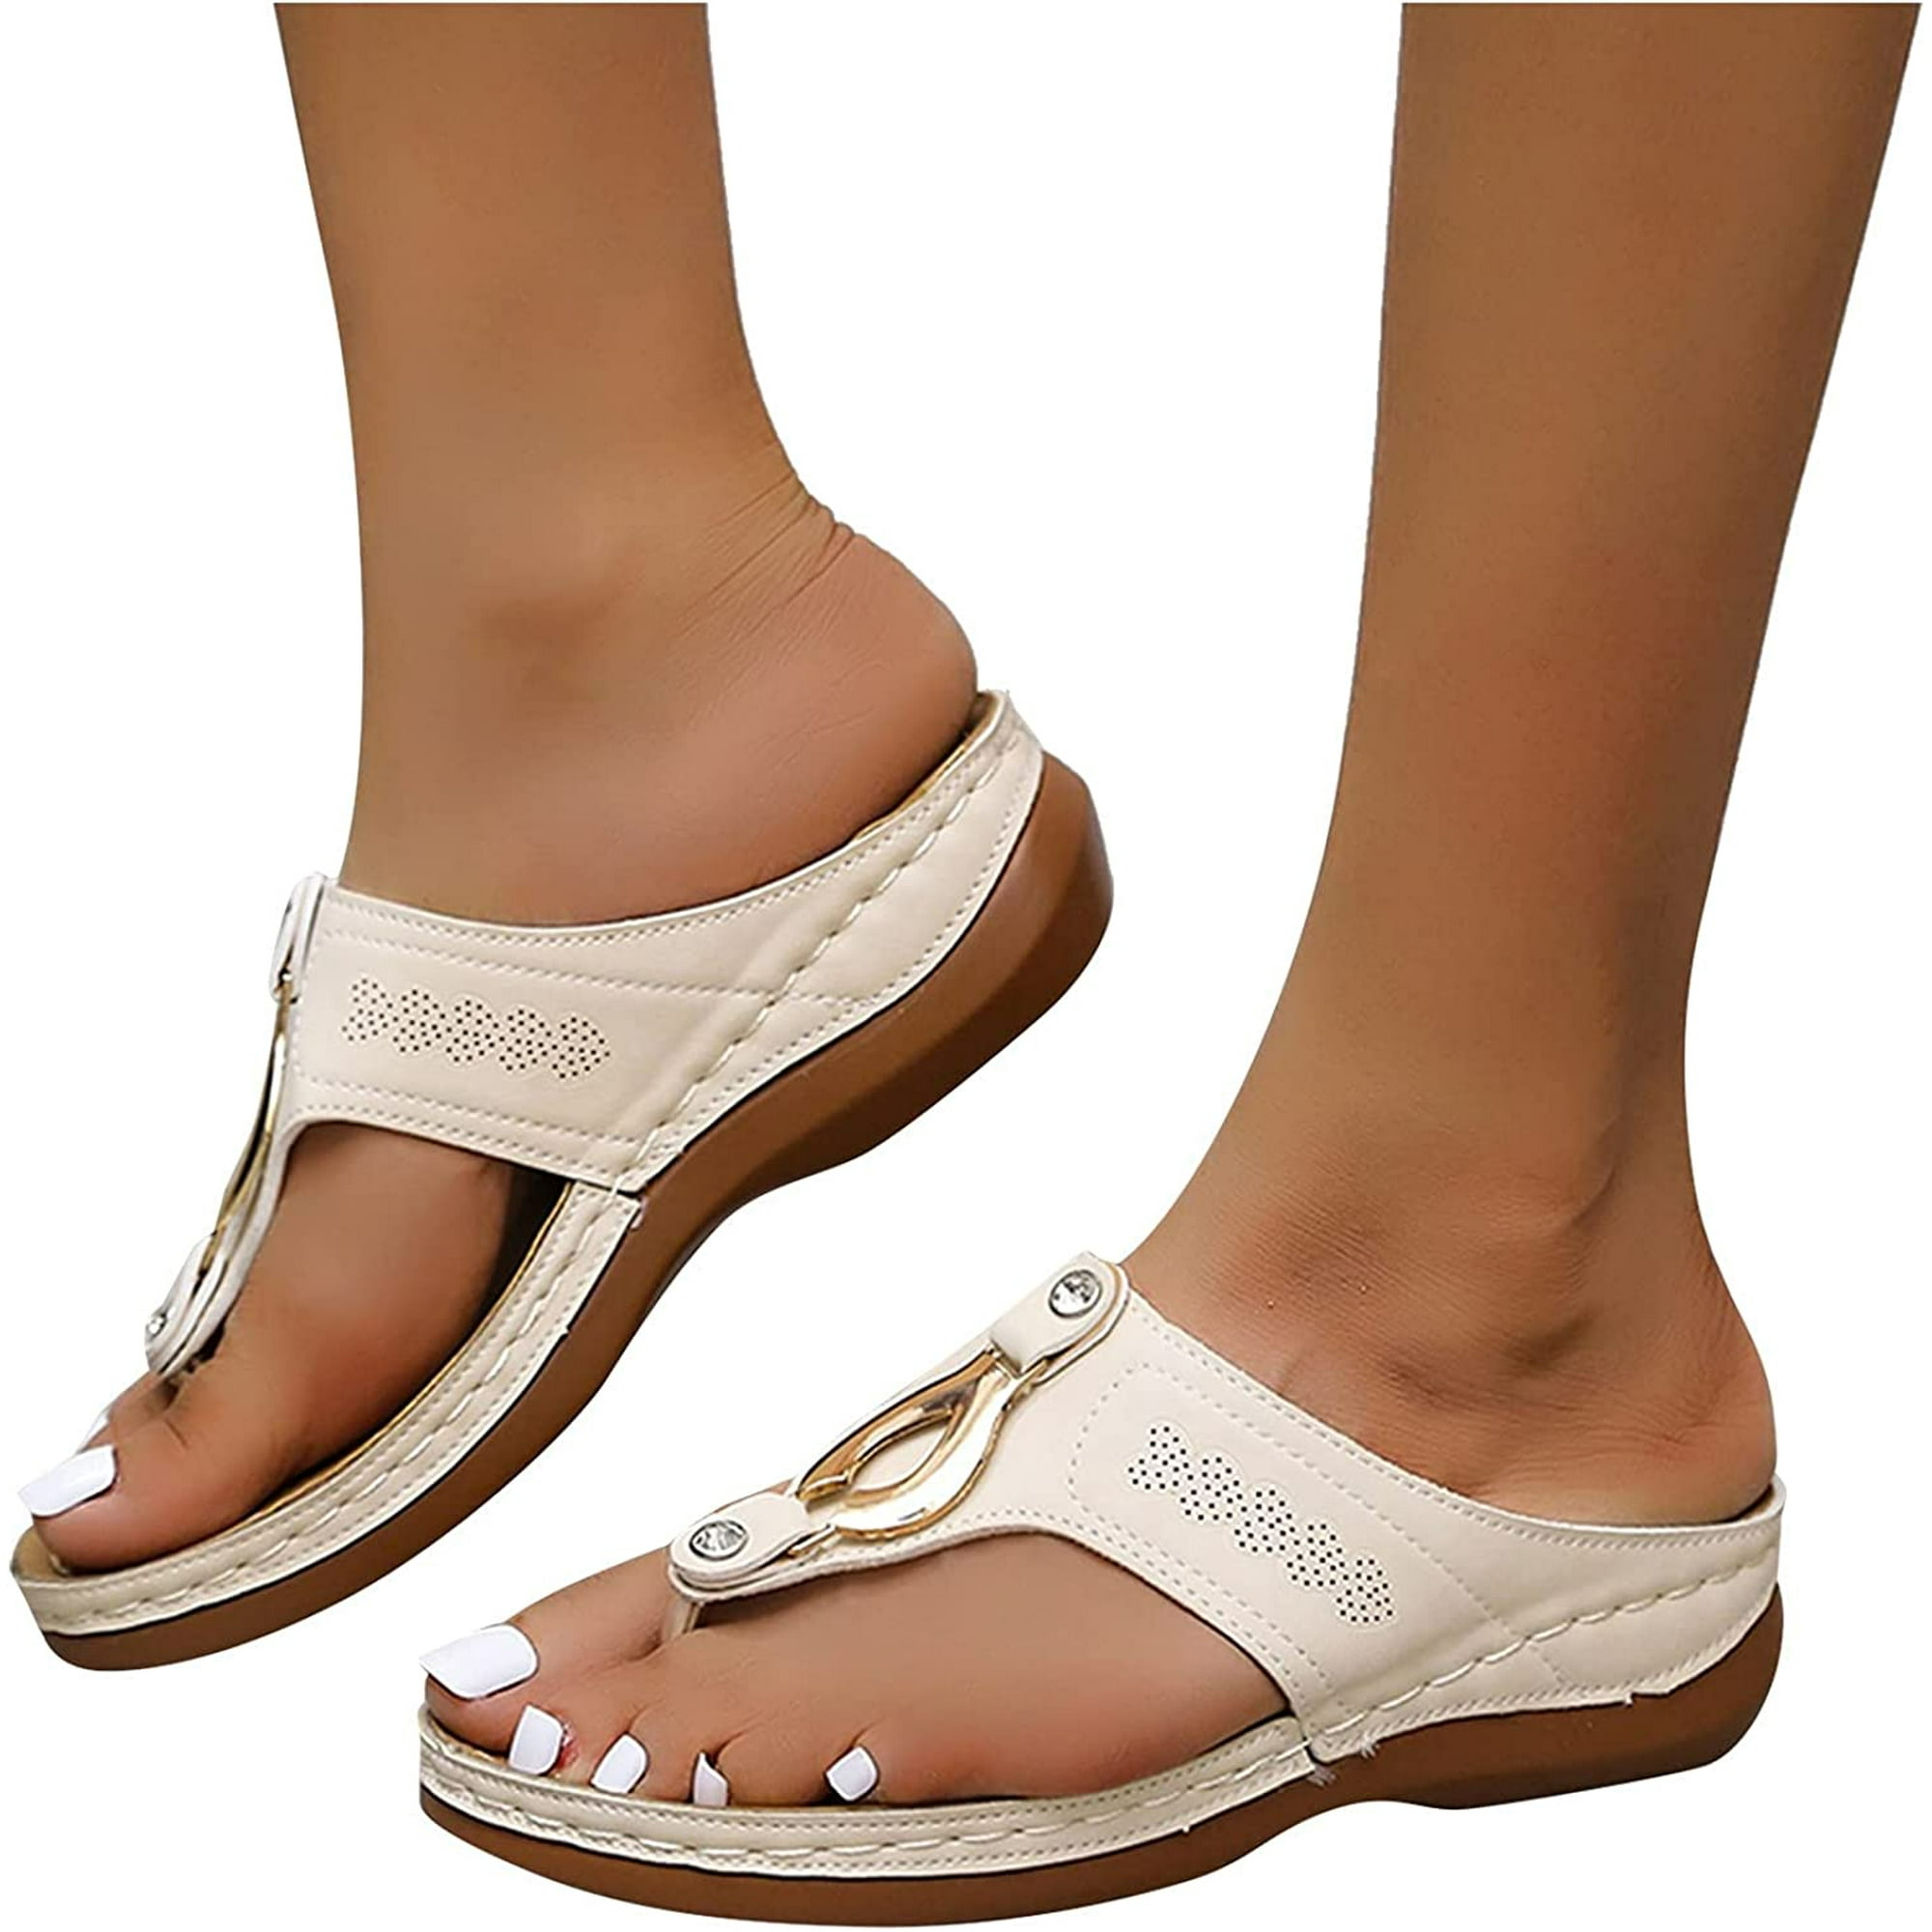  Sandals Women Orthopedic Hollow Out Open Toe Slip on Slippers  Arch Support Anti-Slip Flipflops Comfortable Beach Shoes : Sports & Outdoors